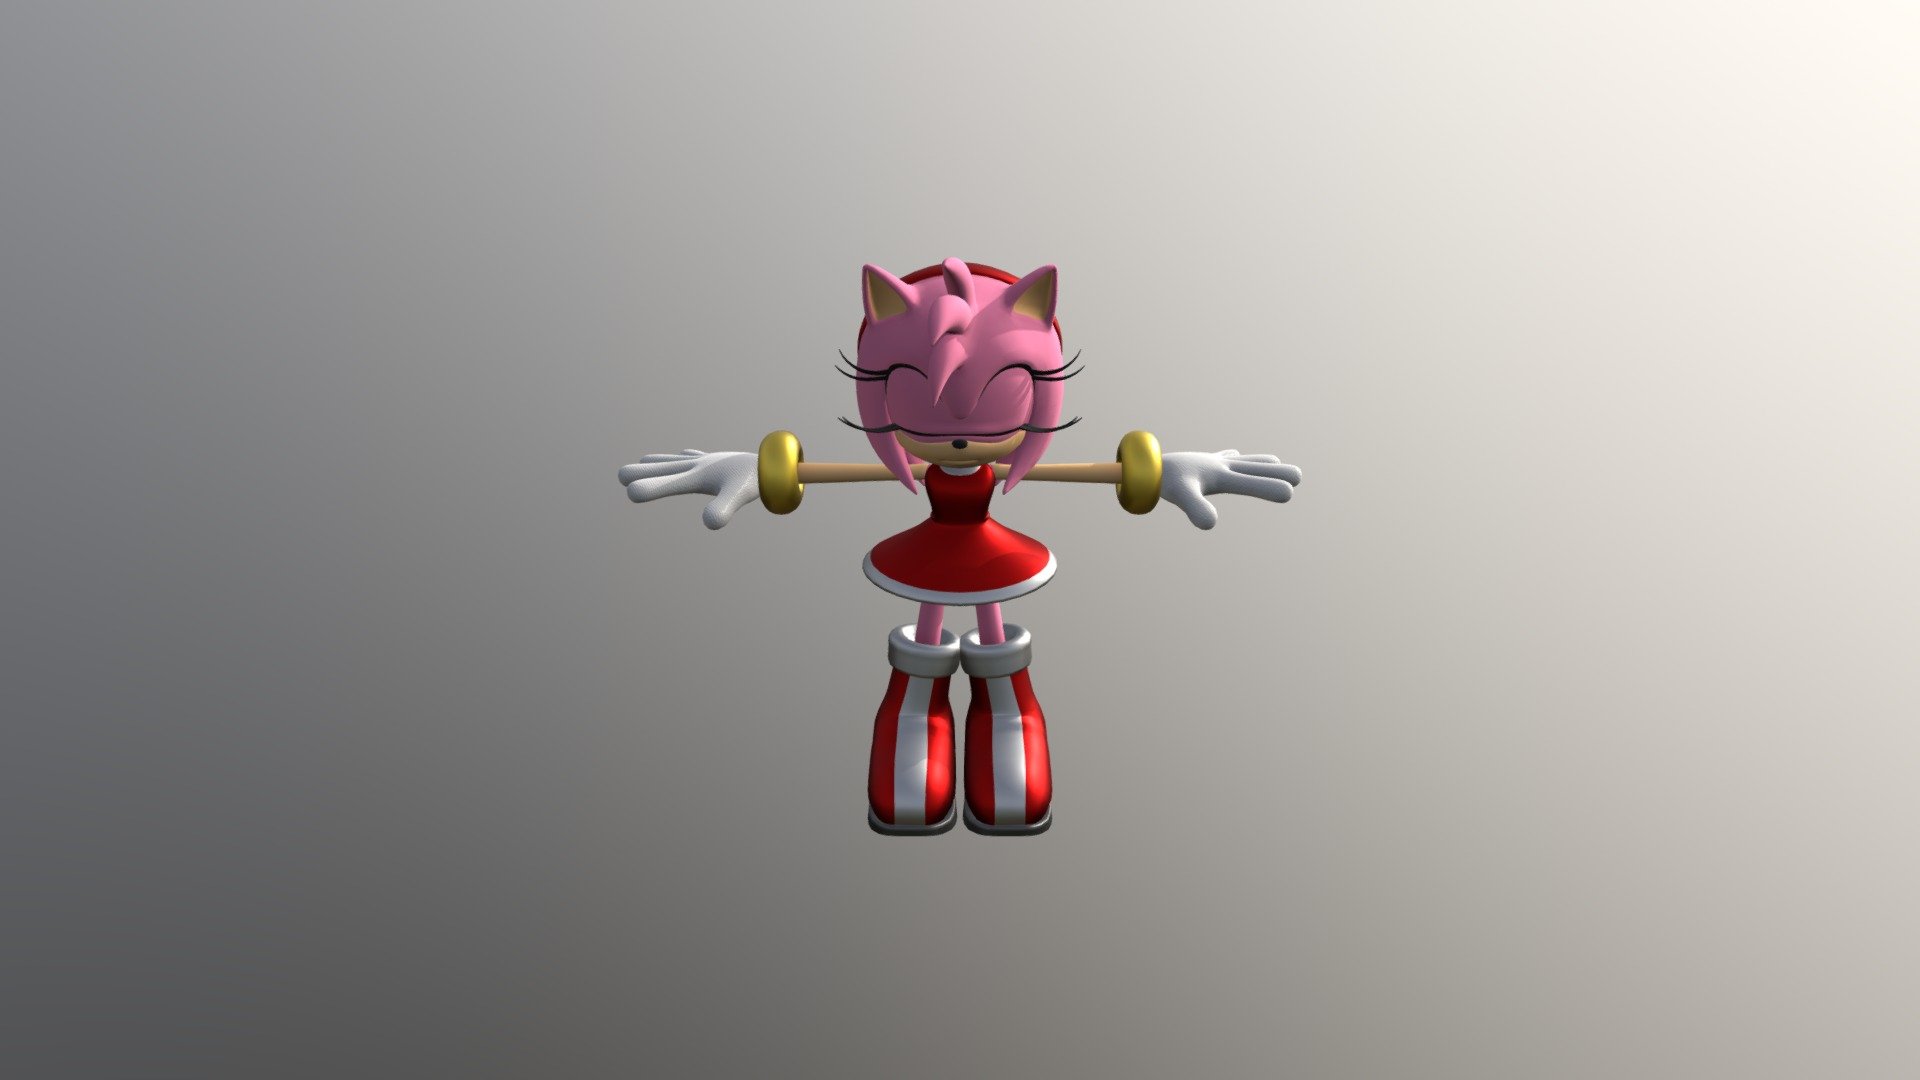 PC Computer - Sonic Forces - Amy Rose - 3D model by sanic111111a 3d model